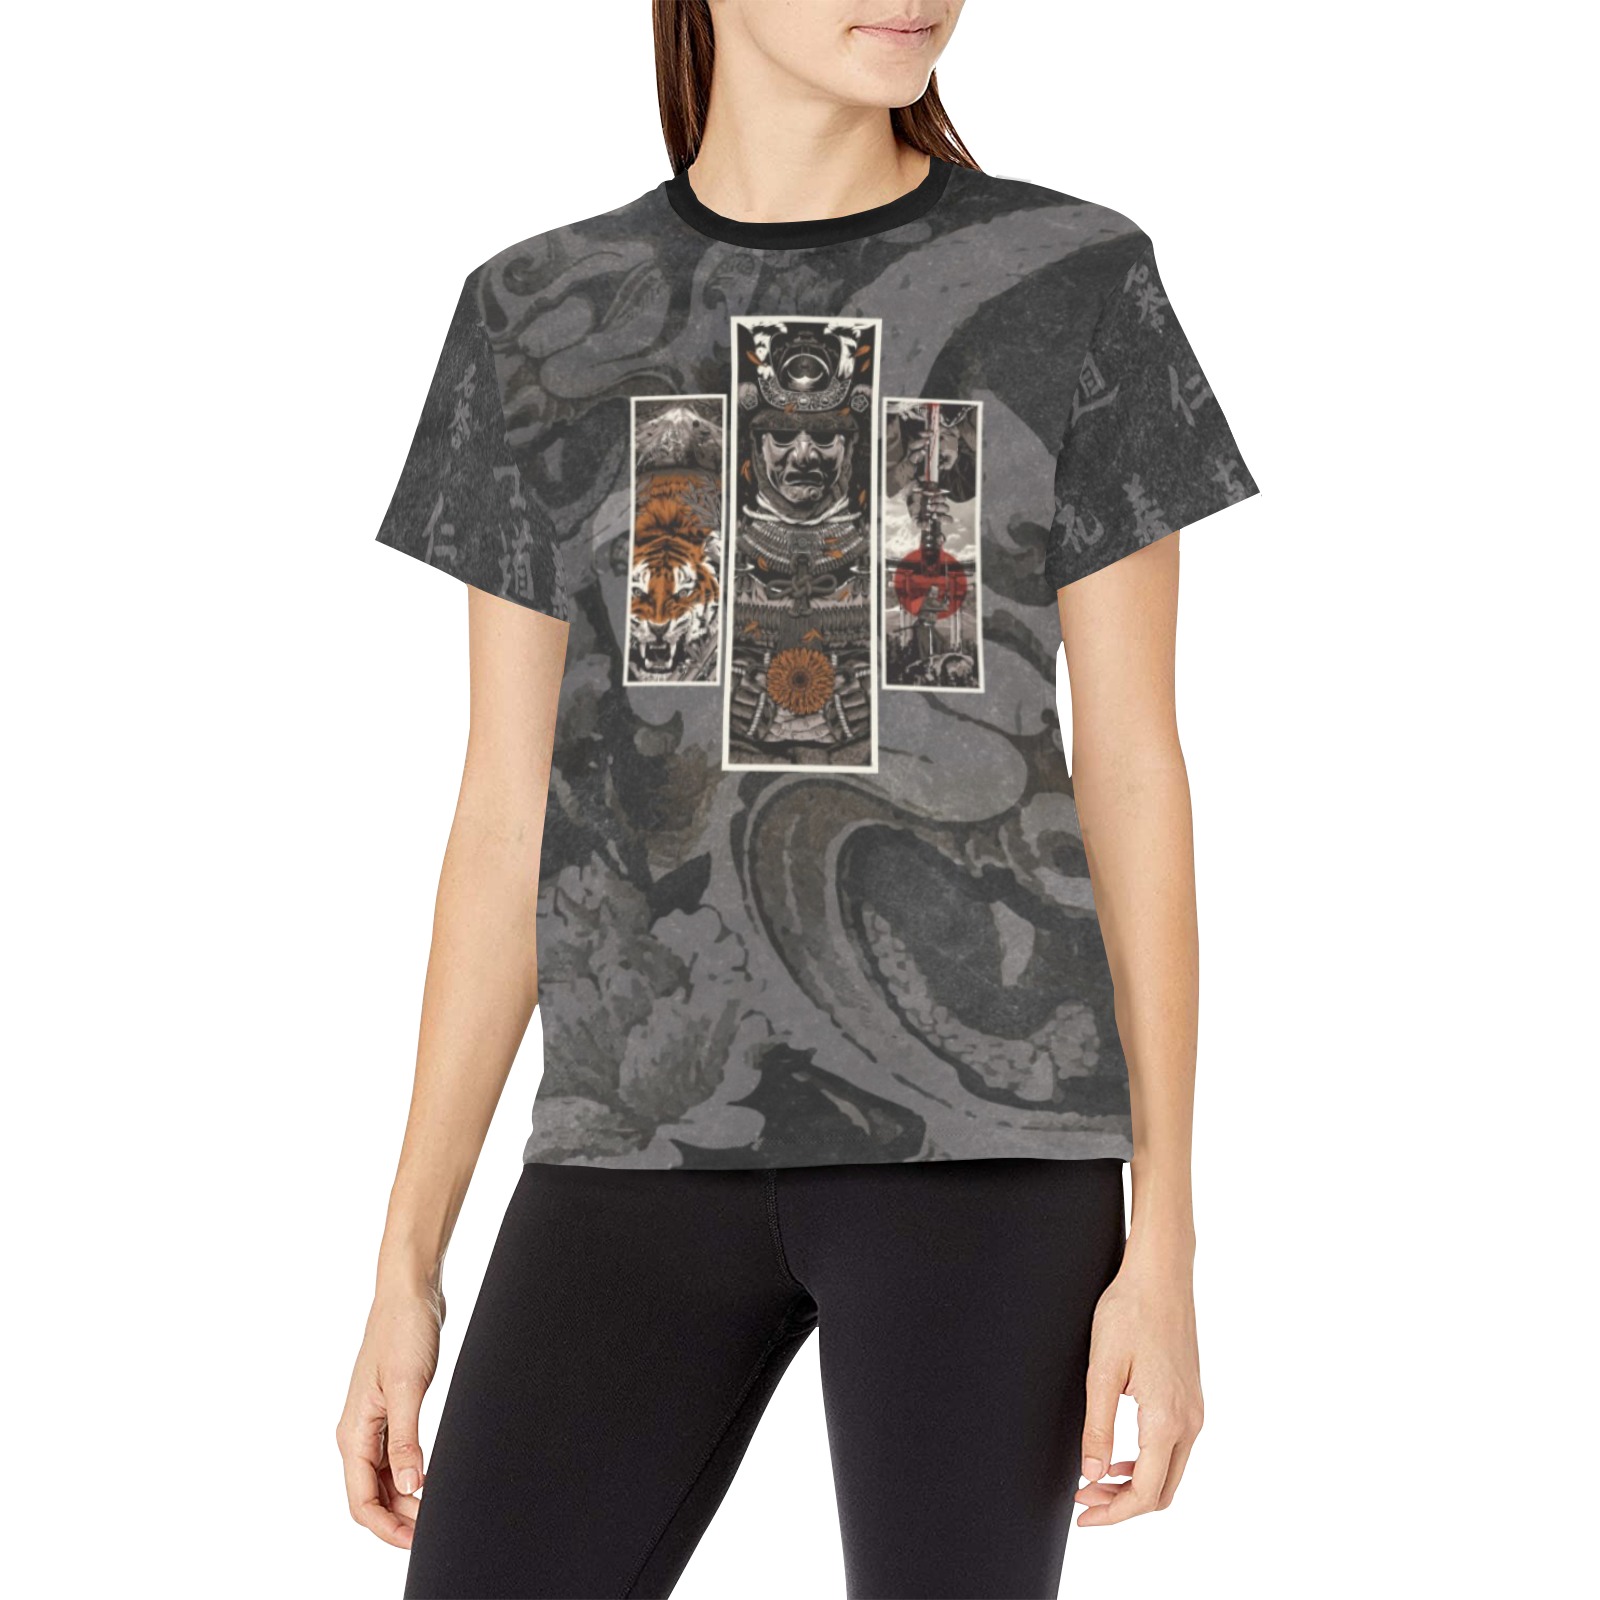 Mitos Japoneses Women's All Over Print Crew Neck T-Shirt (Model T40-2)